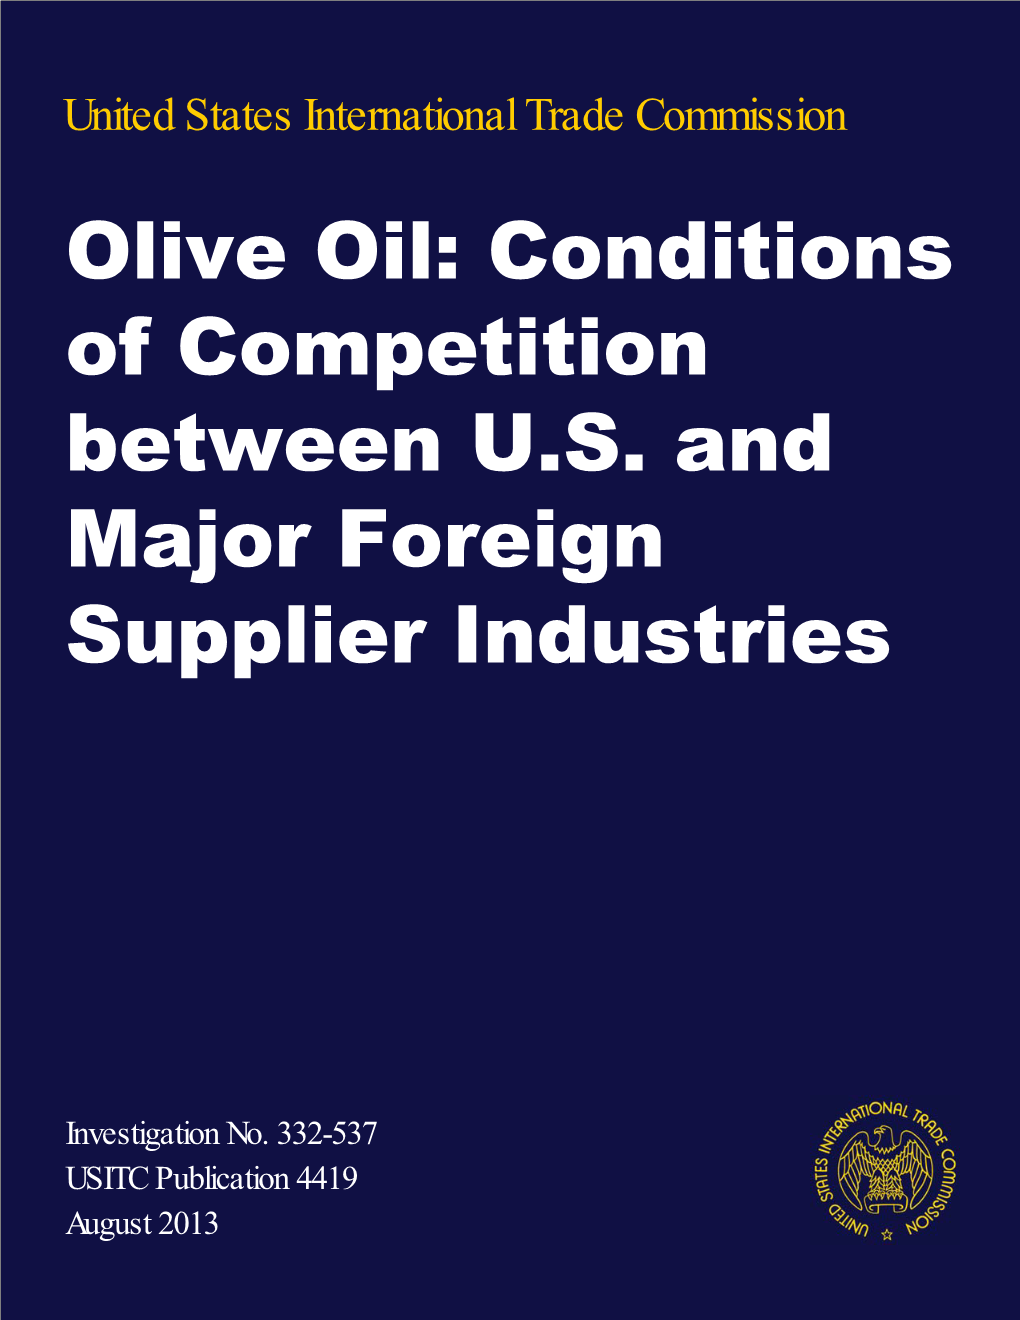 Olive Oil: Conditions of Competition Between U.S